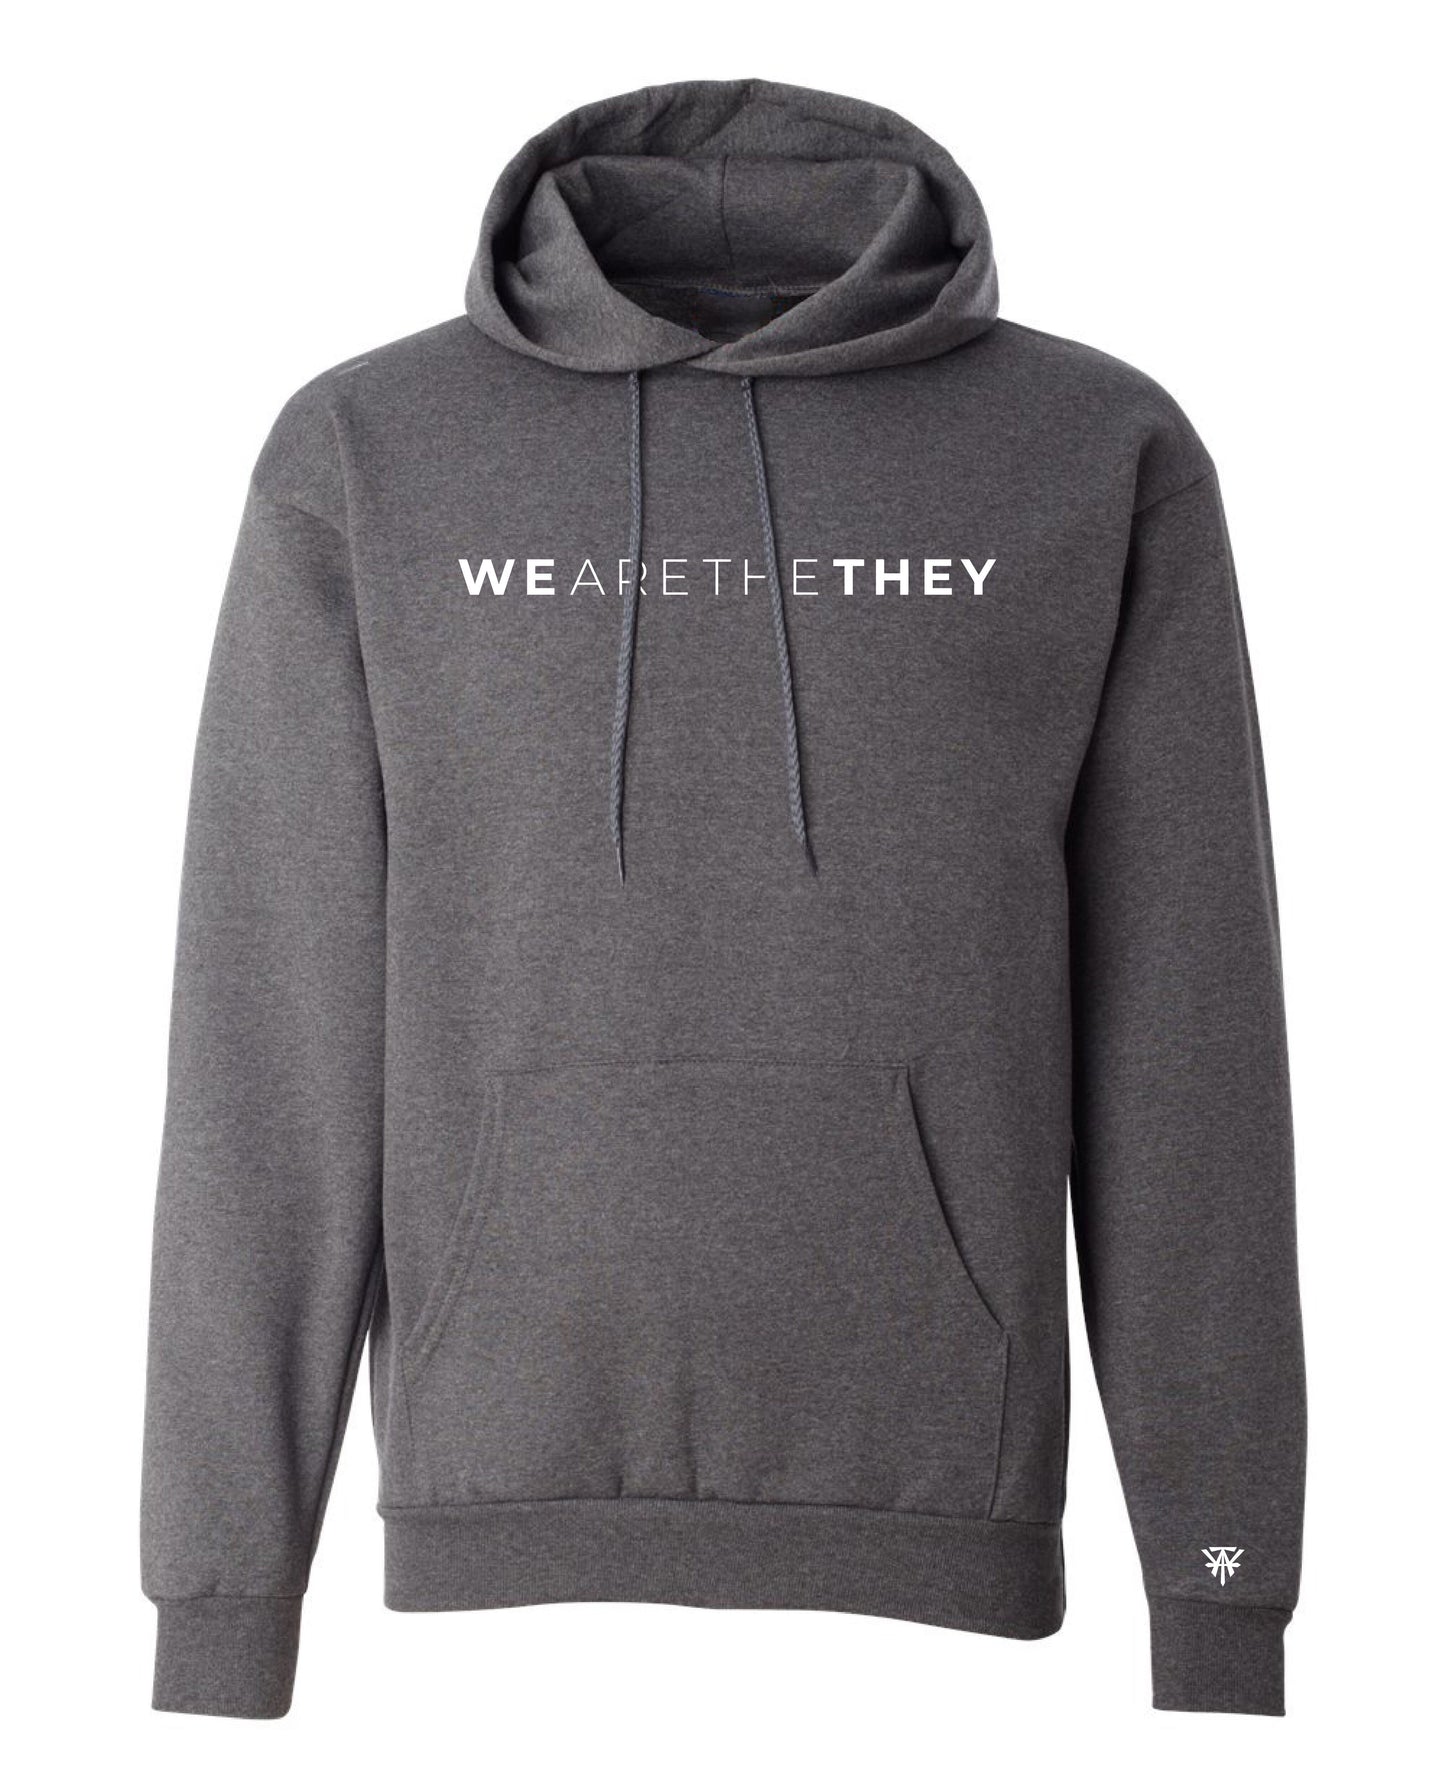 We Are The They Premium Hoodie